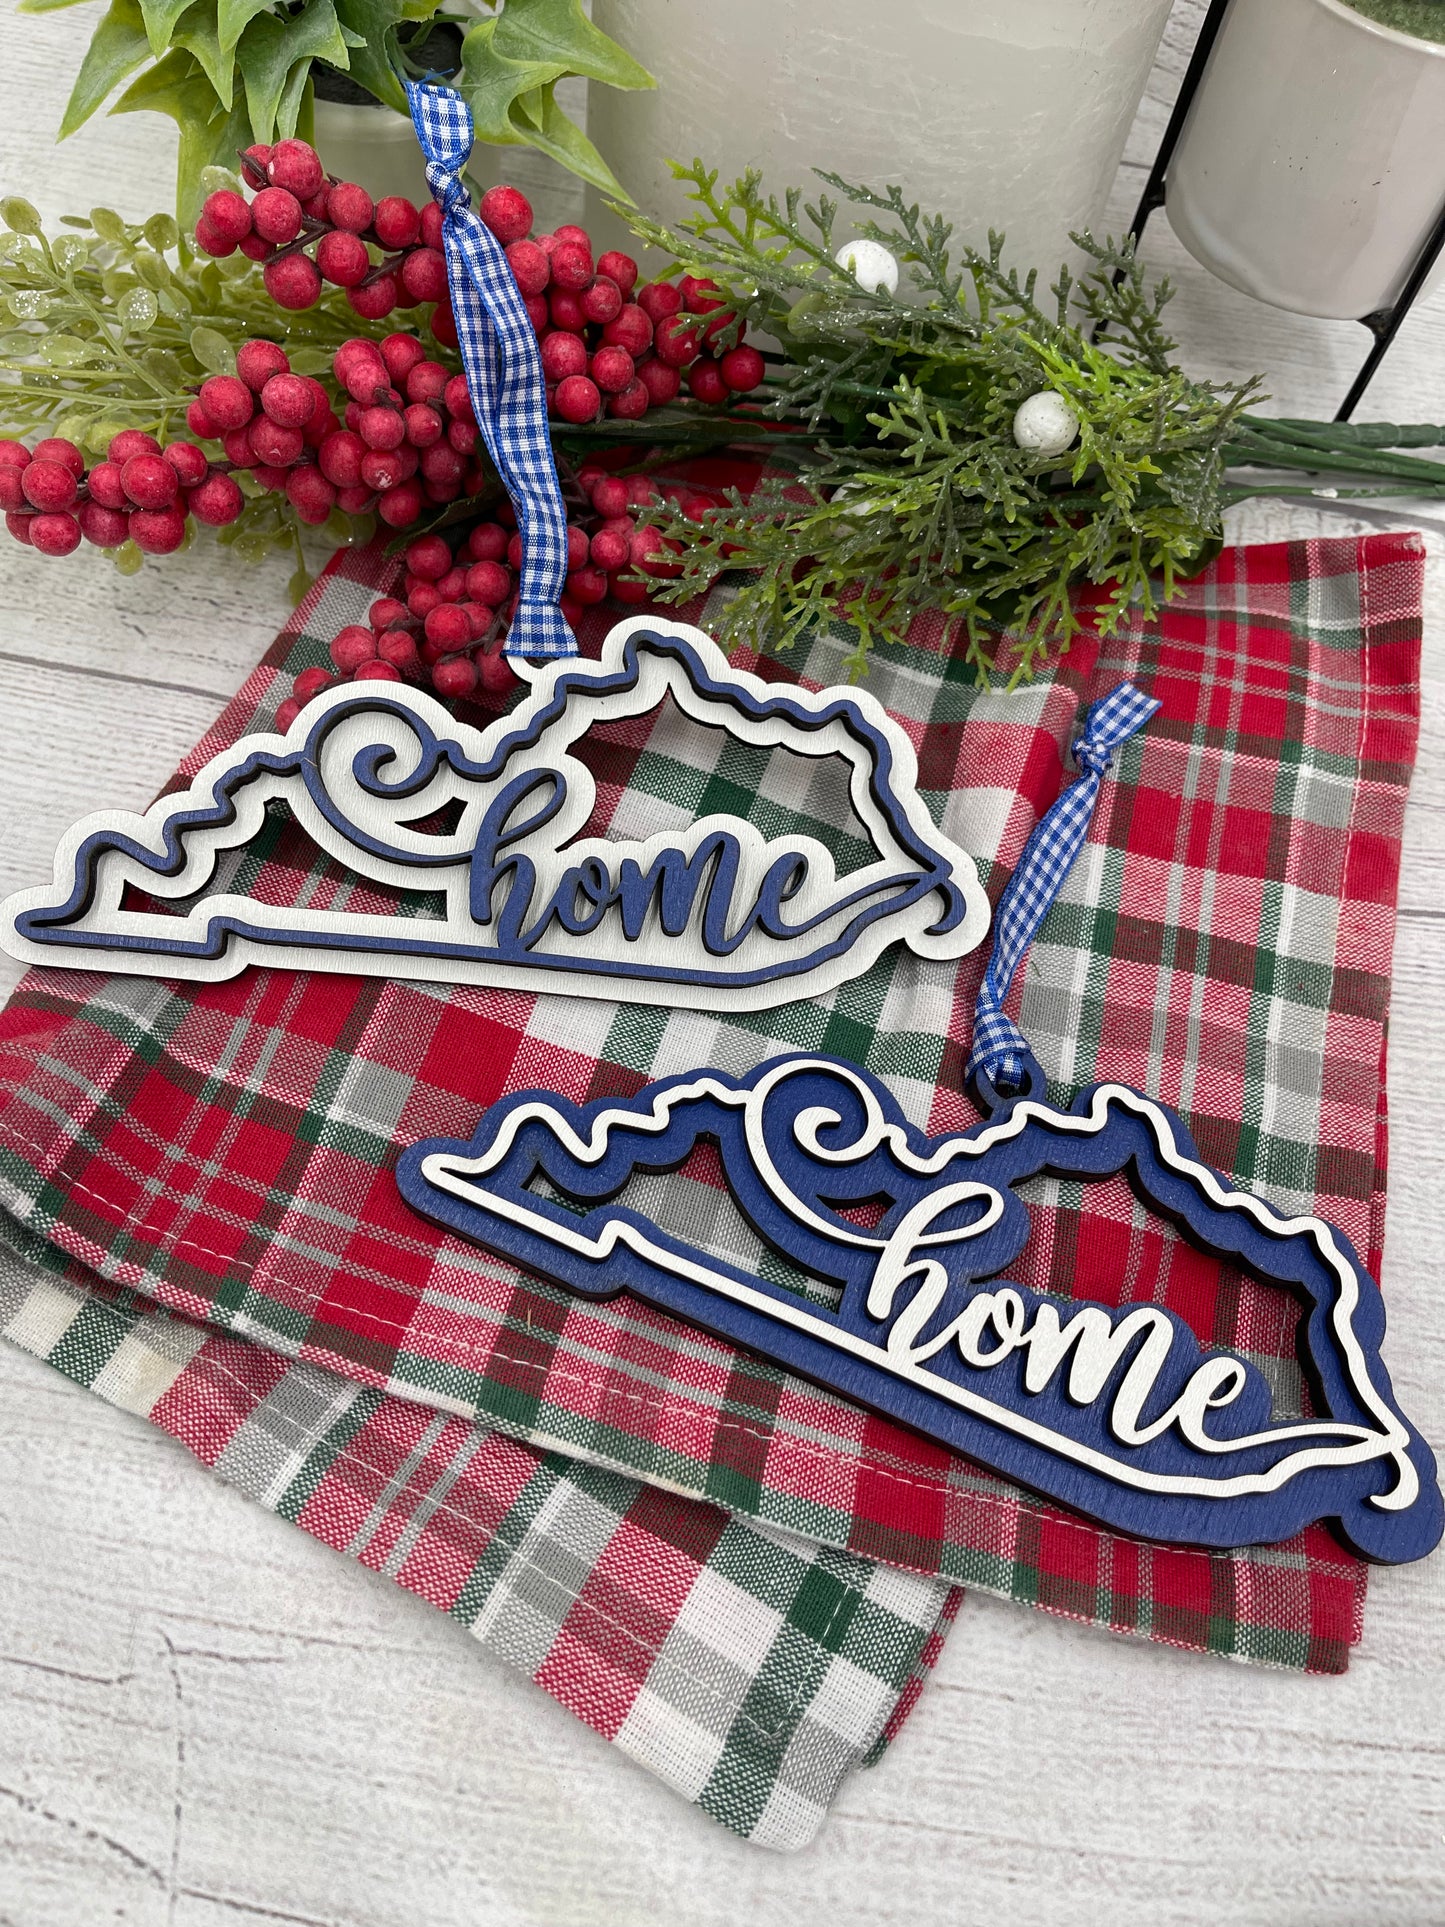 Kentucky Blue and White Christmas Ornament for your Kentucky Tree!!